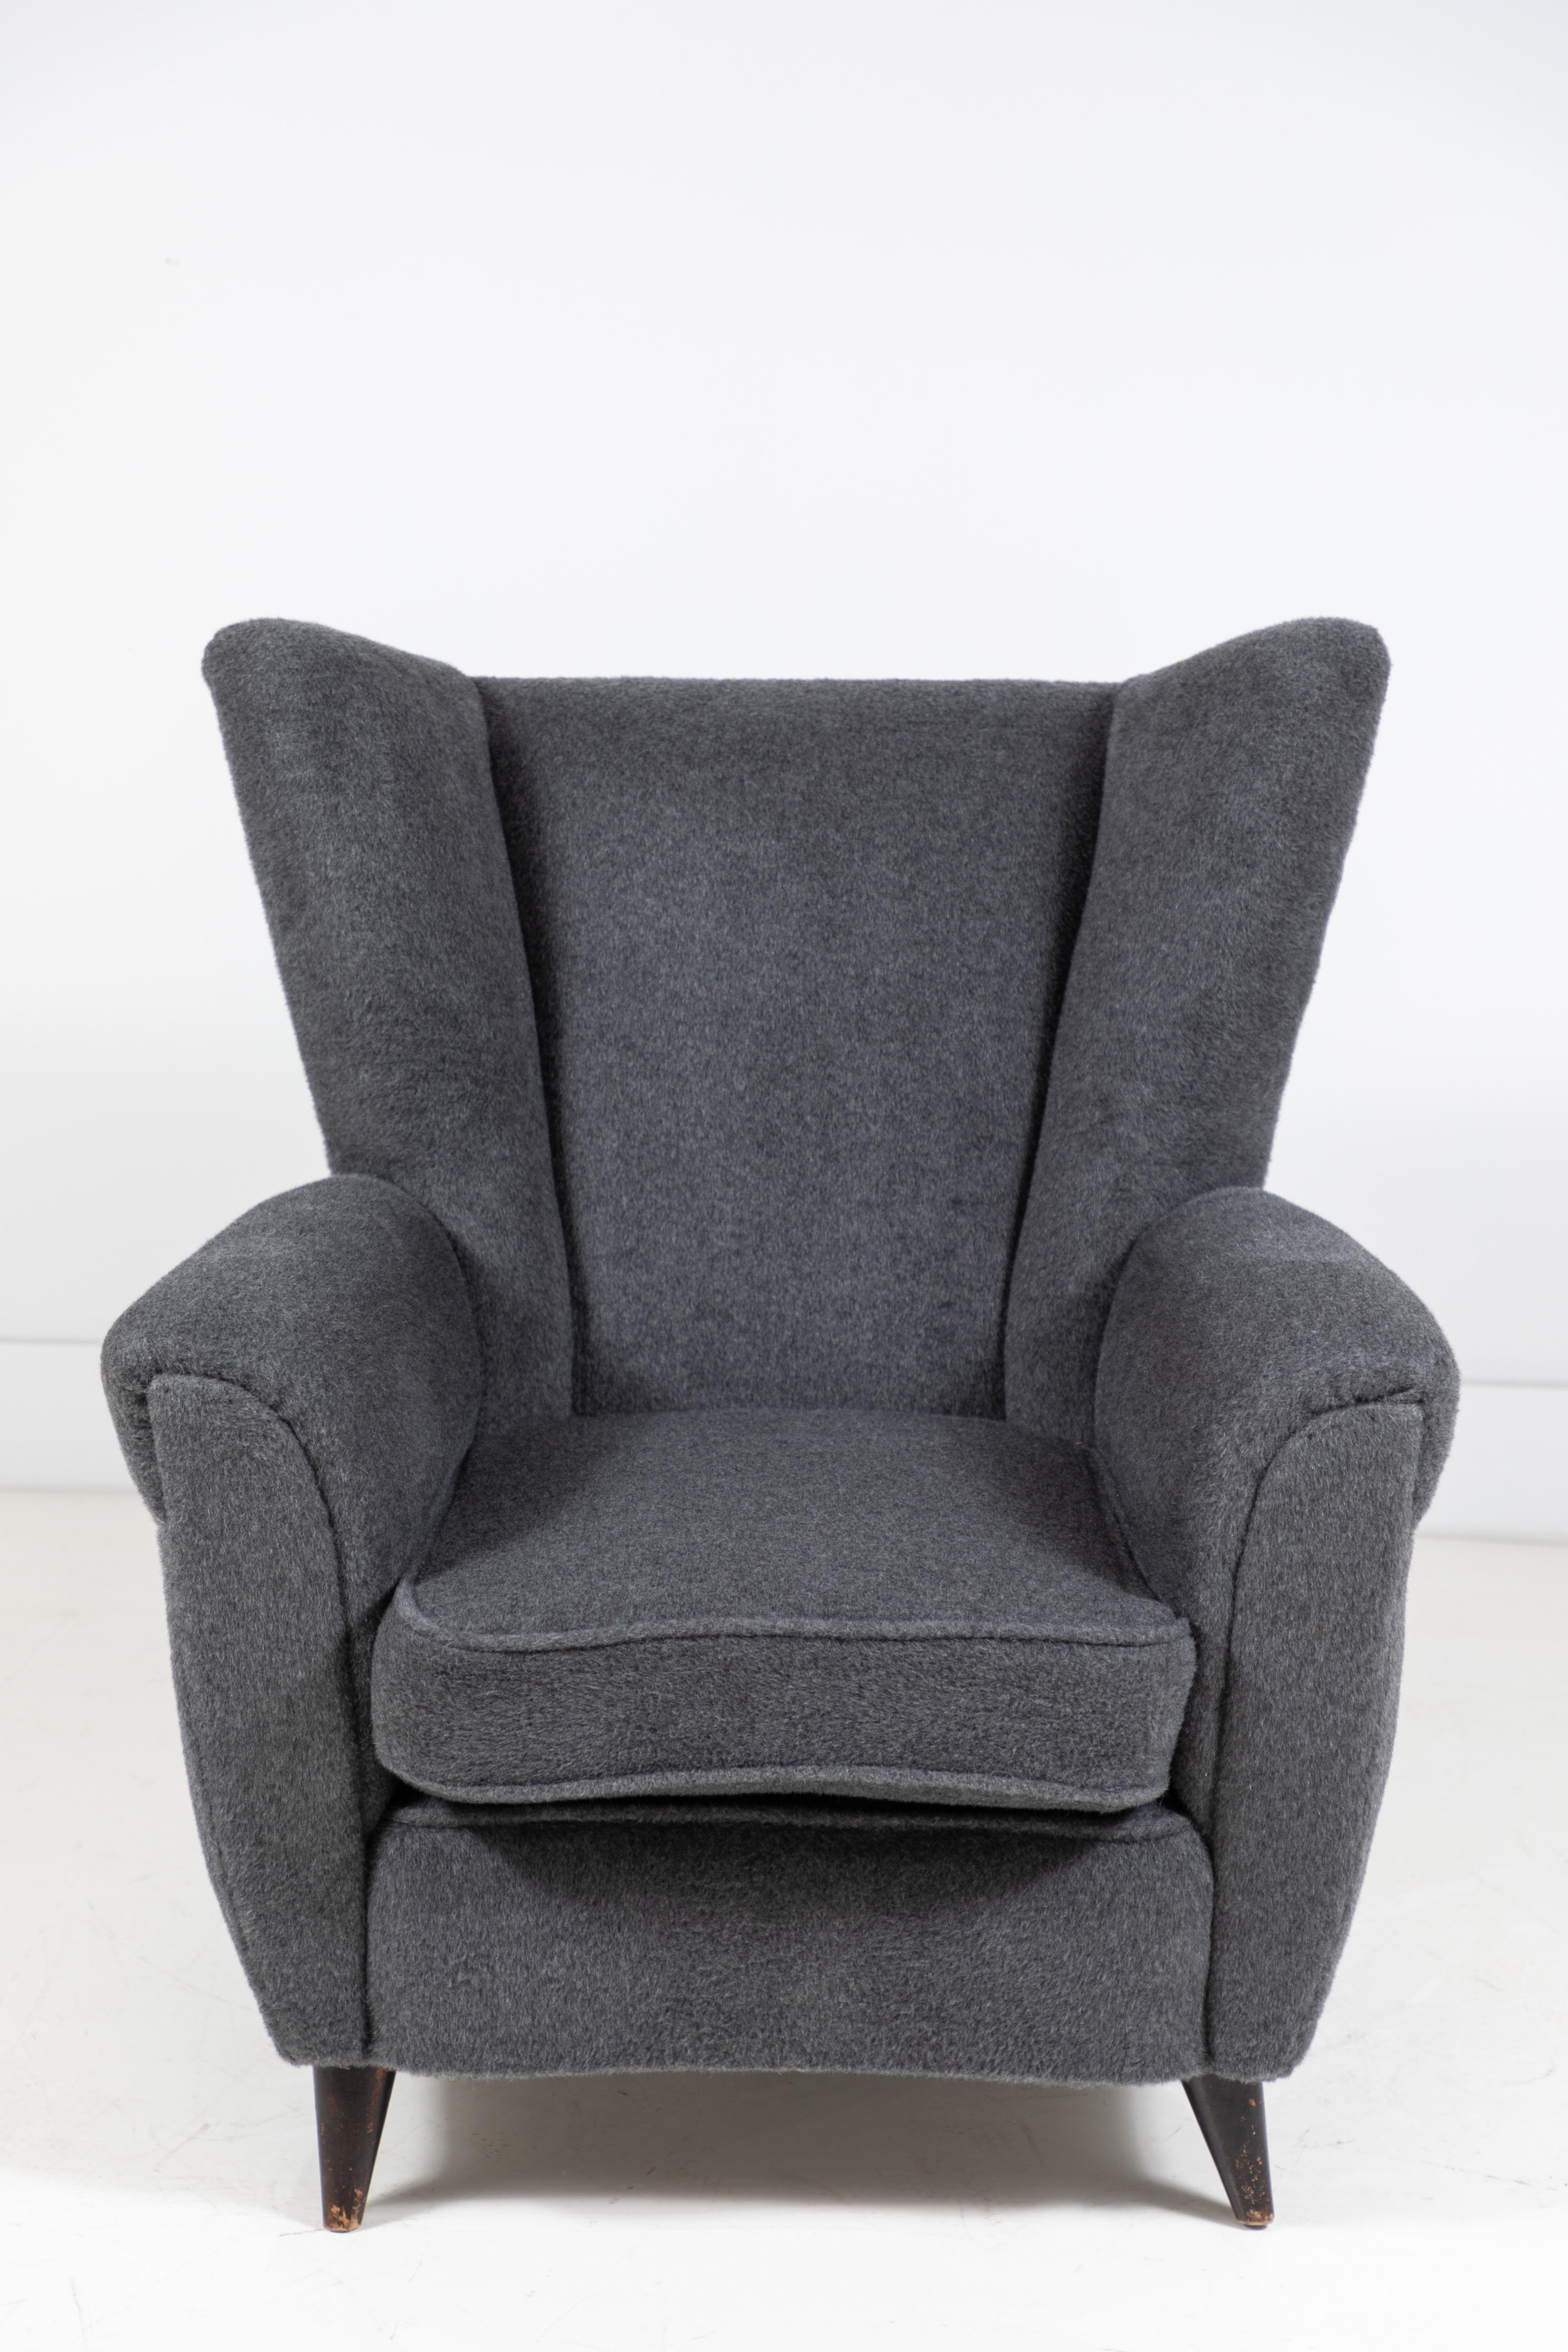 Mohair Pair of French Midcentury Wingback Chairs